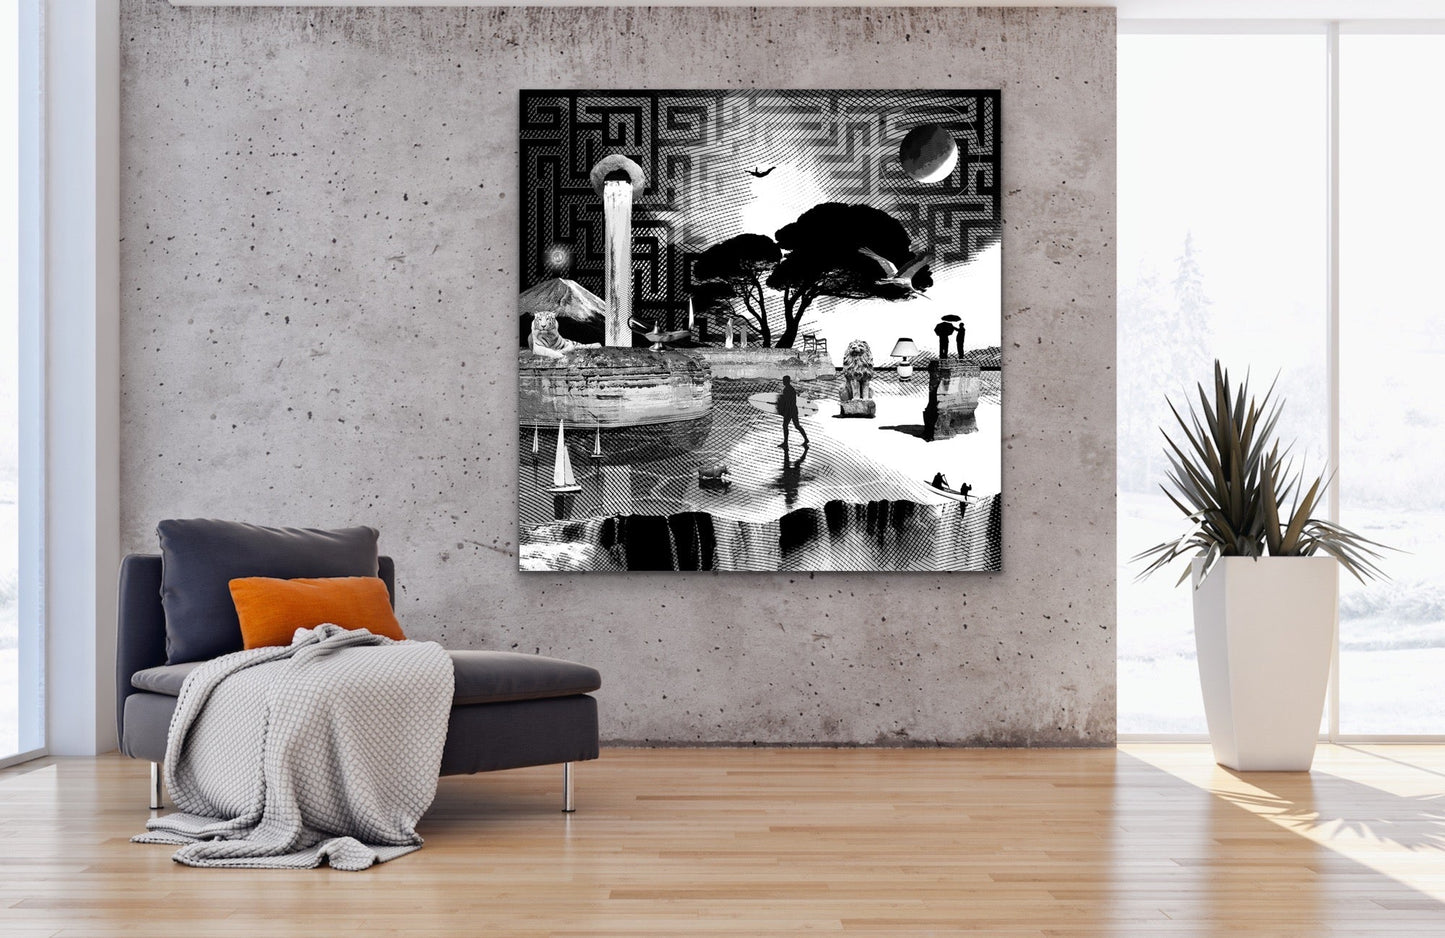 Dreamcatchers 07 - Surreal Limited Edition Giclee, Black & White on Canvas